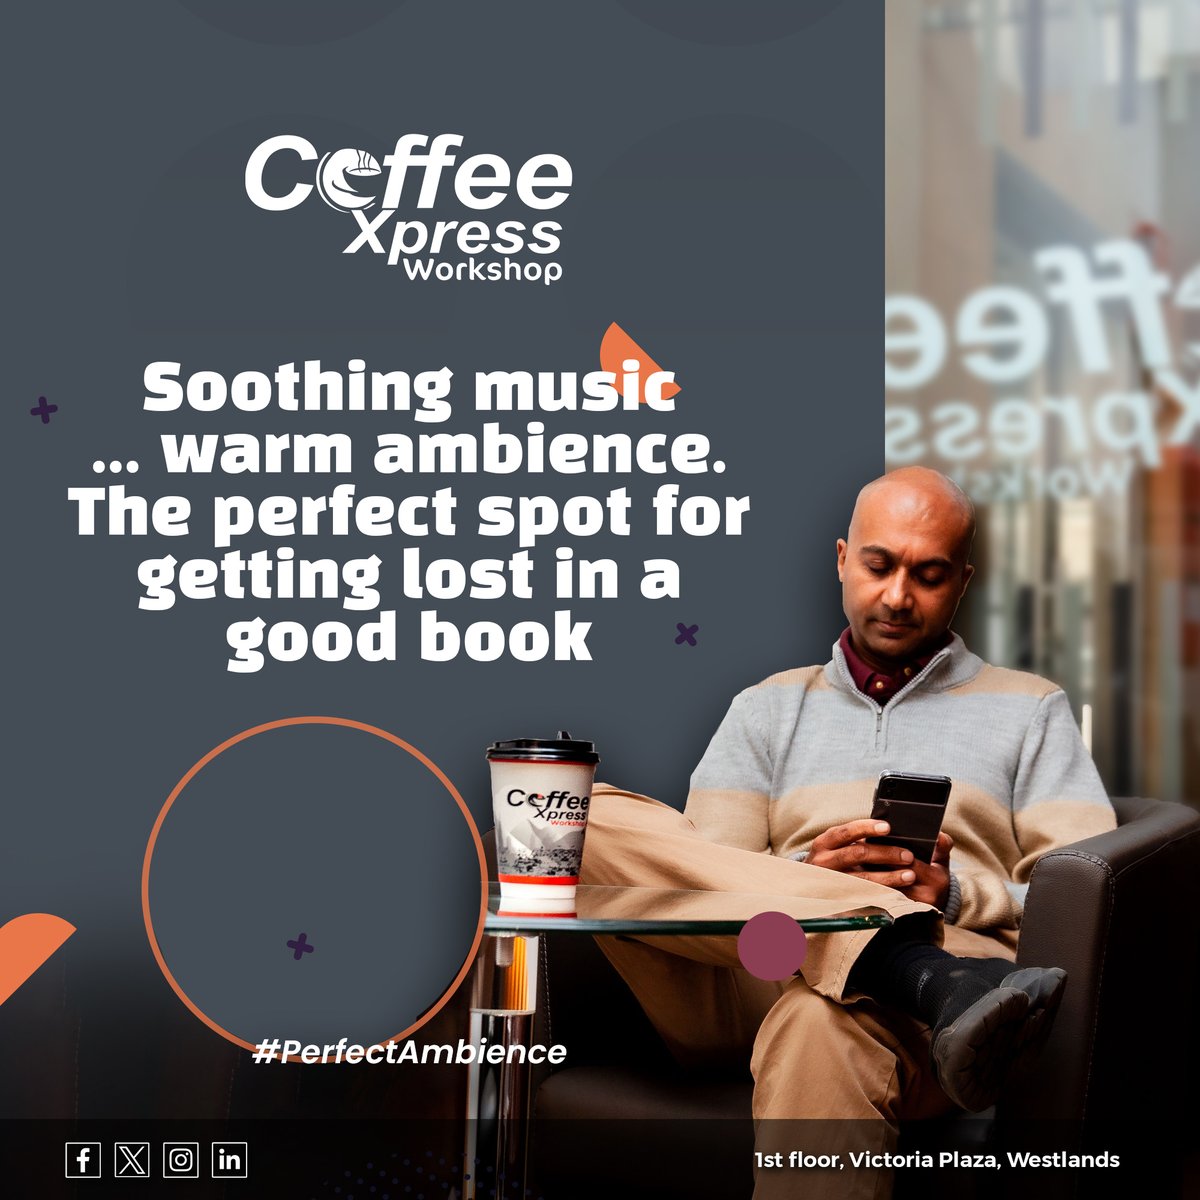 Escape the hustle and bustle of the outside world and immerse yourself in our serene atmosphere.

#CoffeeAndFriends #CozyVibes #CoffeeXpressWorkshop #coffeevibes☕️ #coffeetime #coffeeshop #coffeeplacewestlands #coffeetime #coffeelover #westlandscoffeeshop #coffeedaily